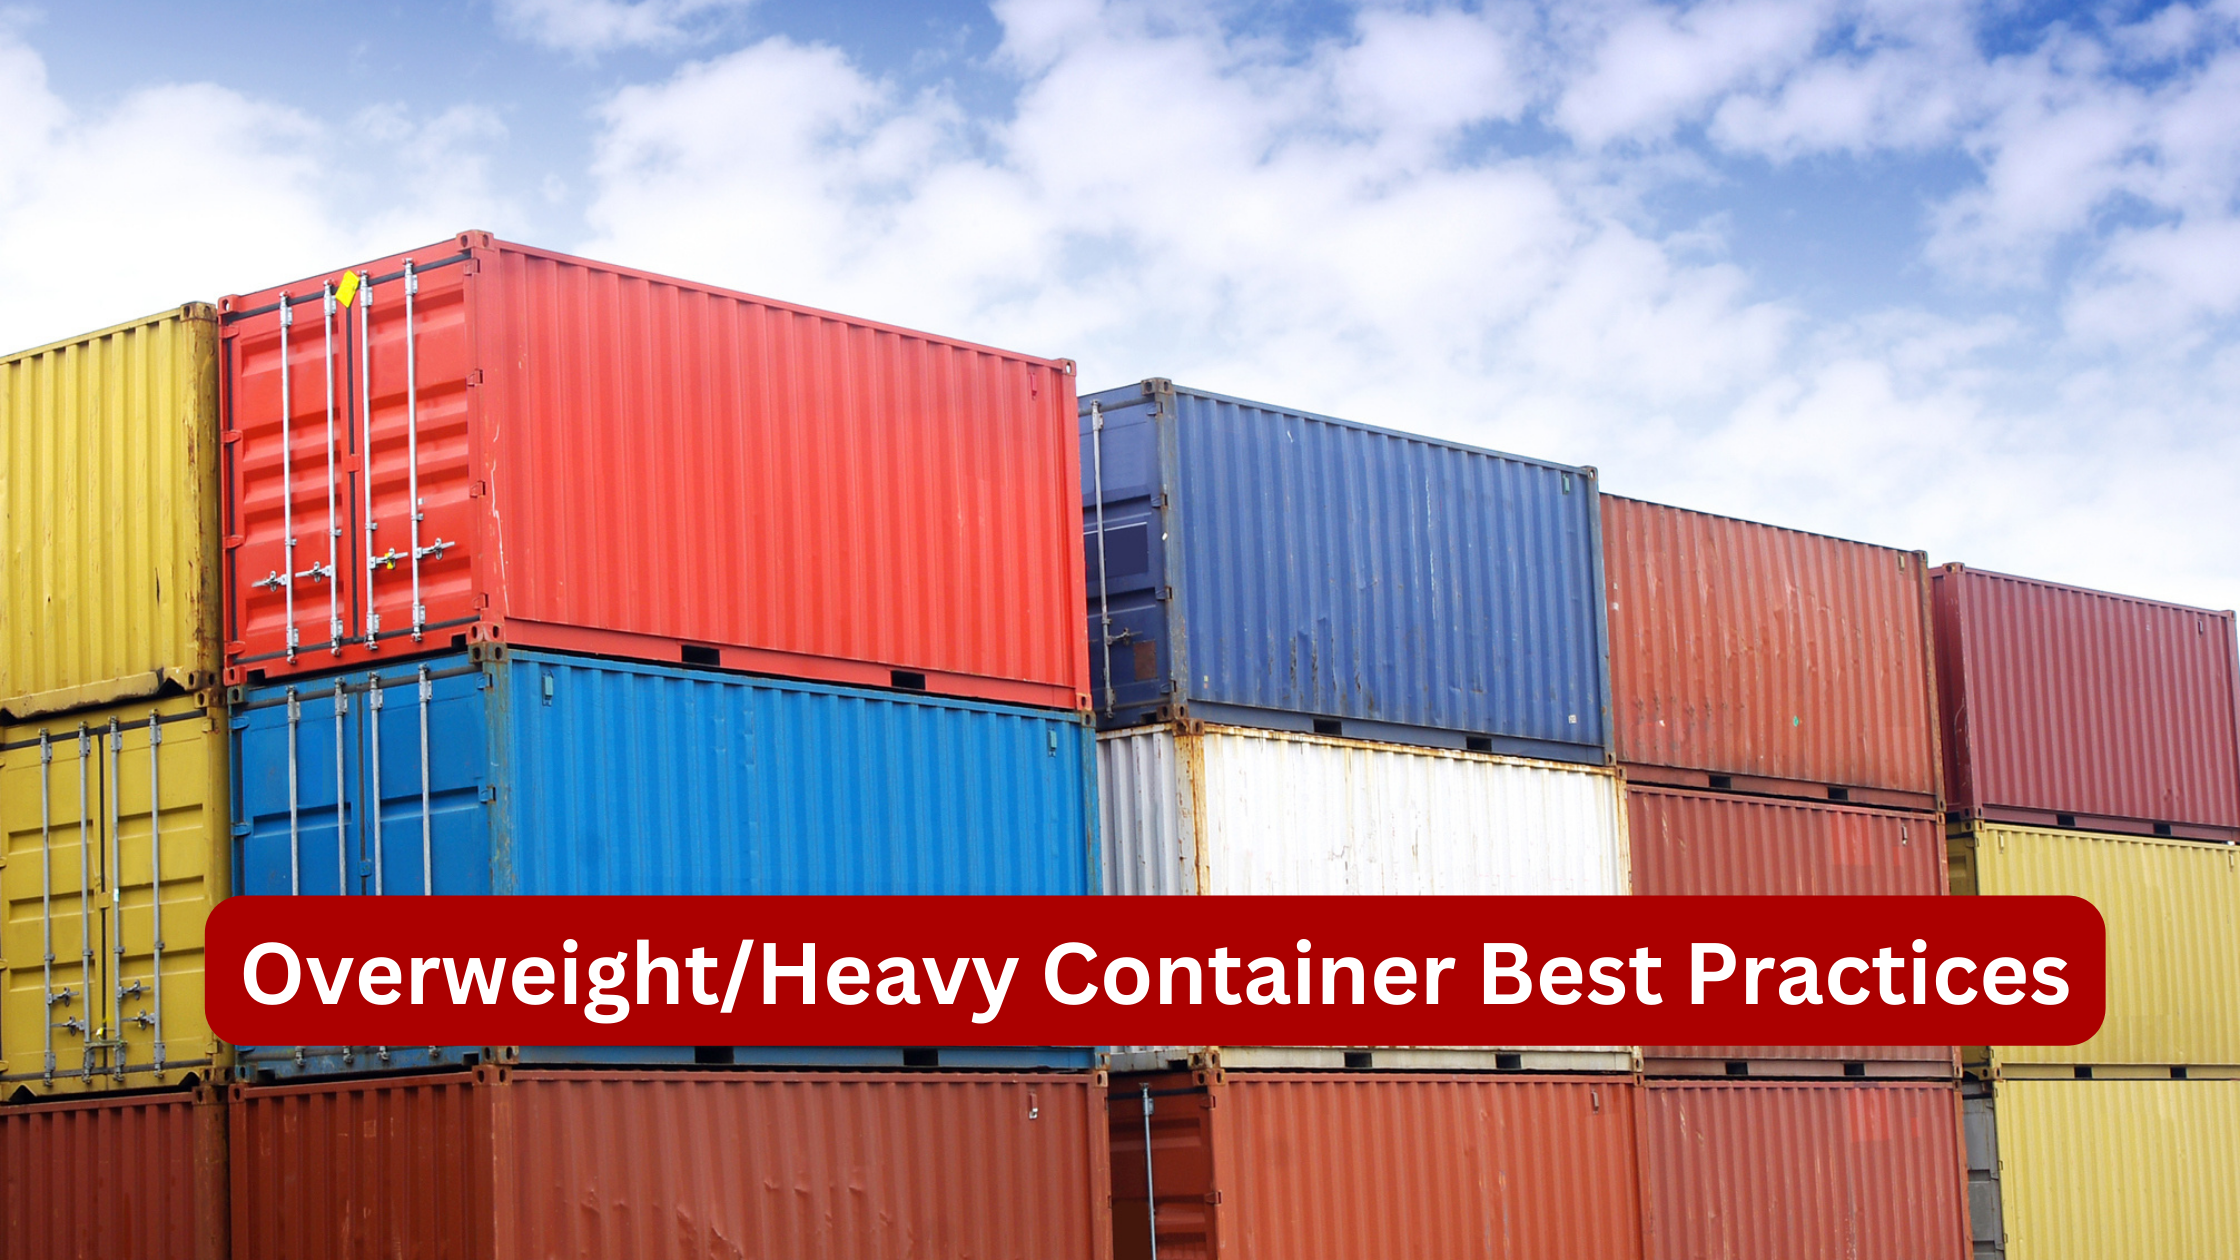 Overweight/Heavy Container Best Practices